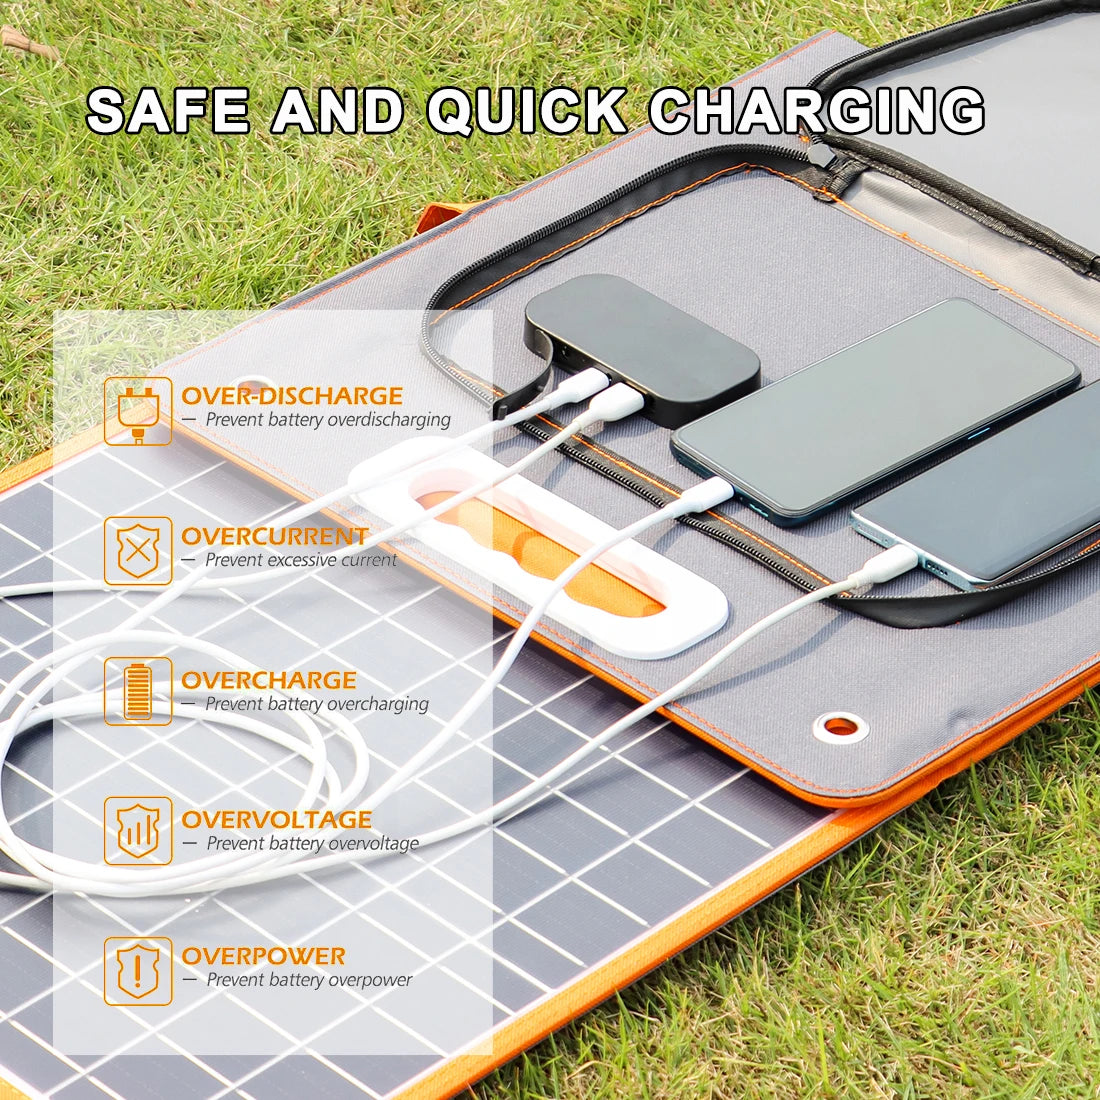 FlashFish Solar Panel, Advanced safety features prevent device damage from over-discharge to overload.